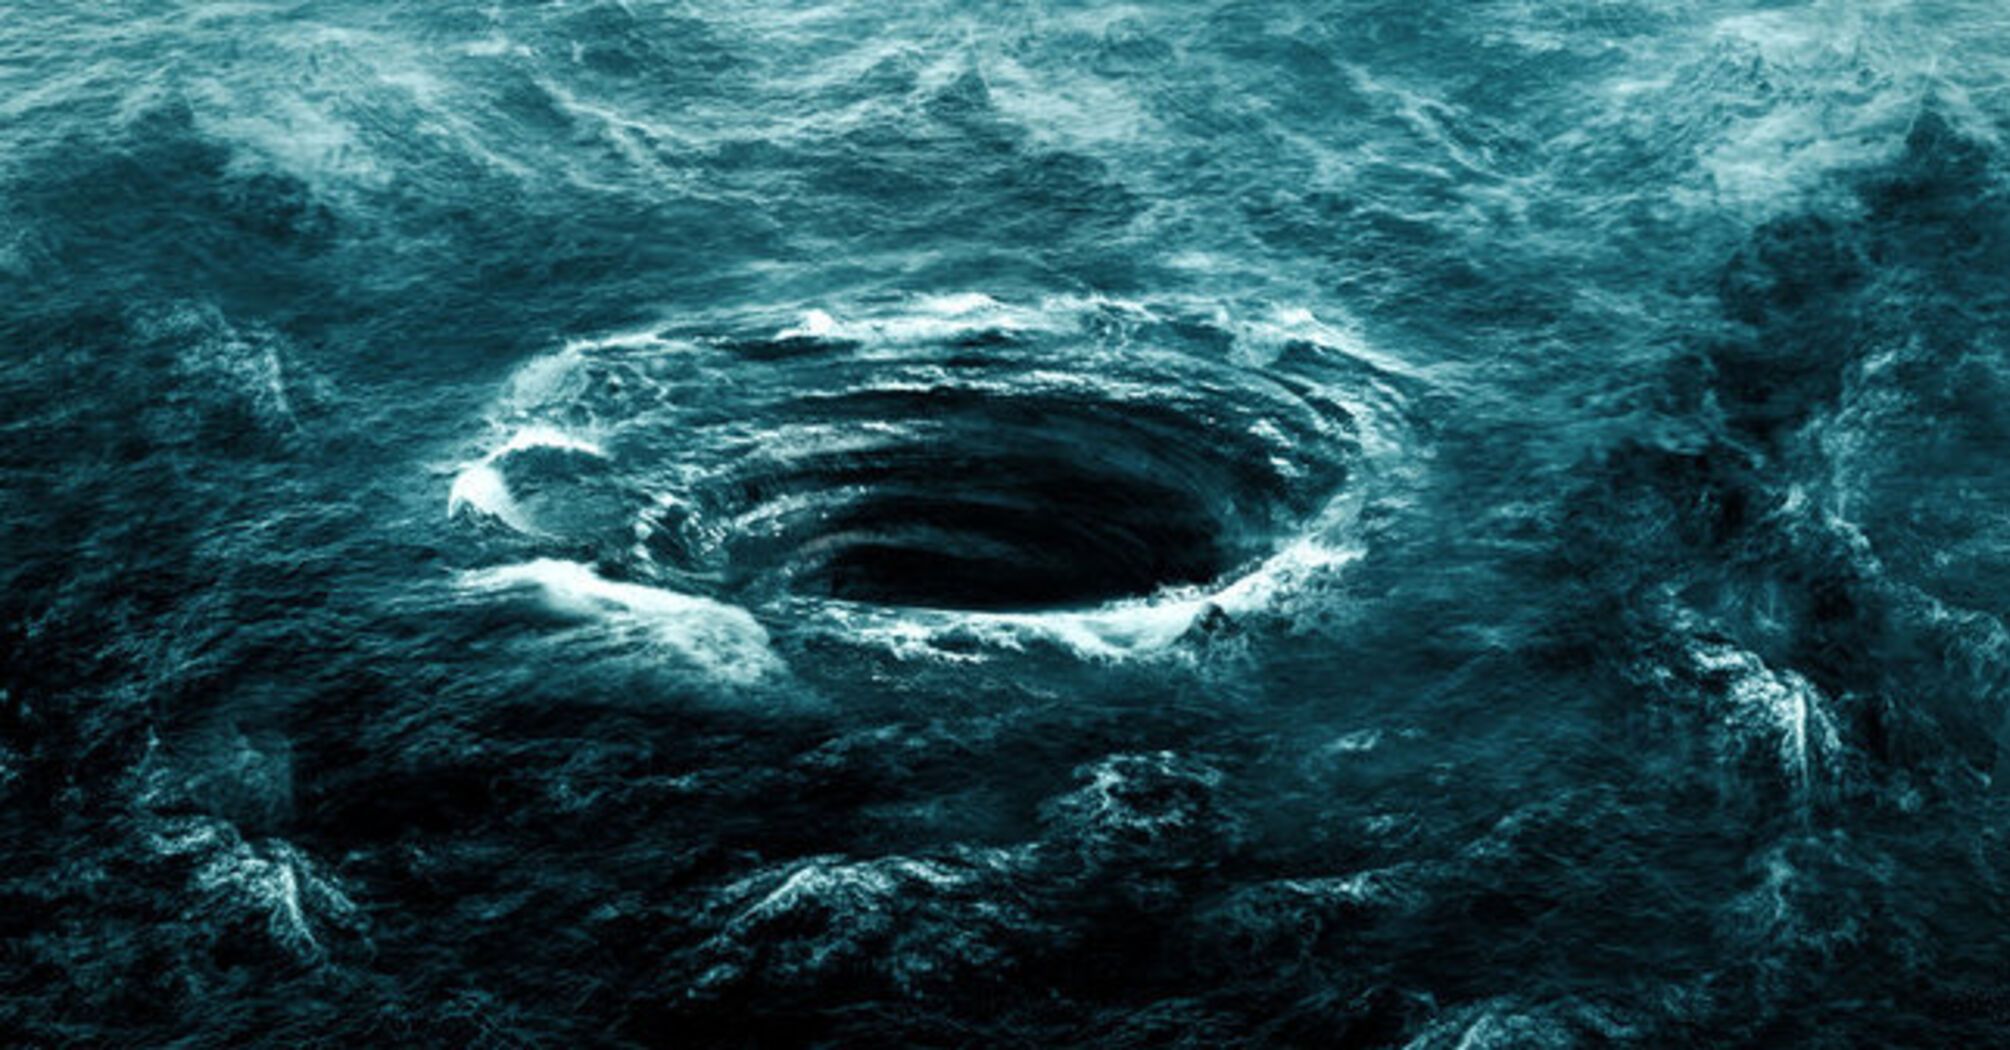 The mystery behind the Bermuda Triangle explained: scientists destroy the popular myth